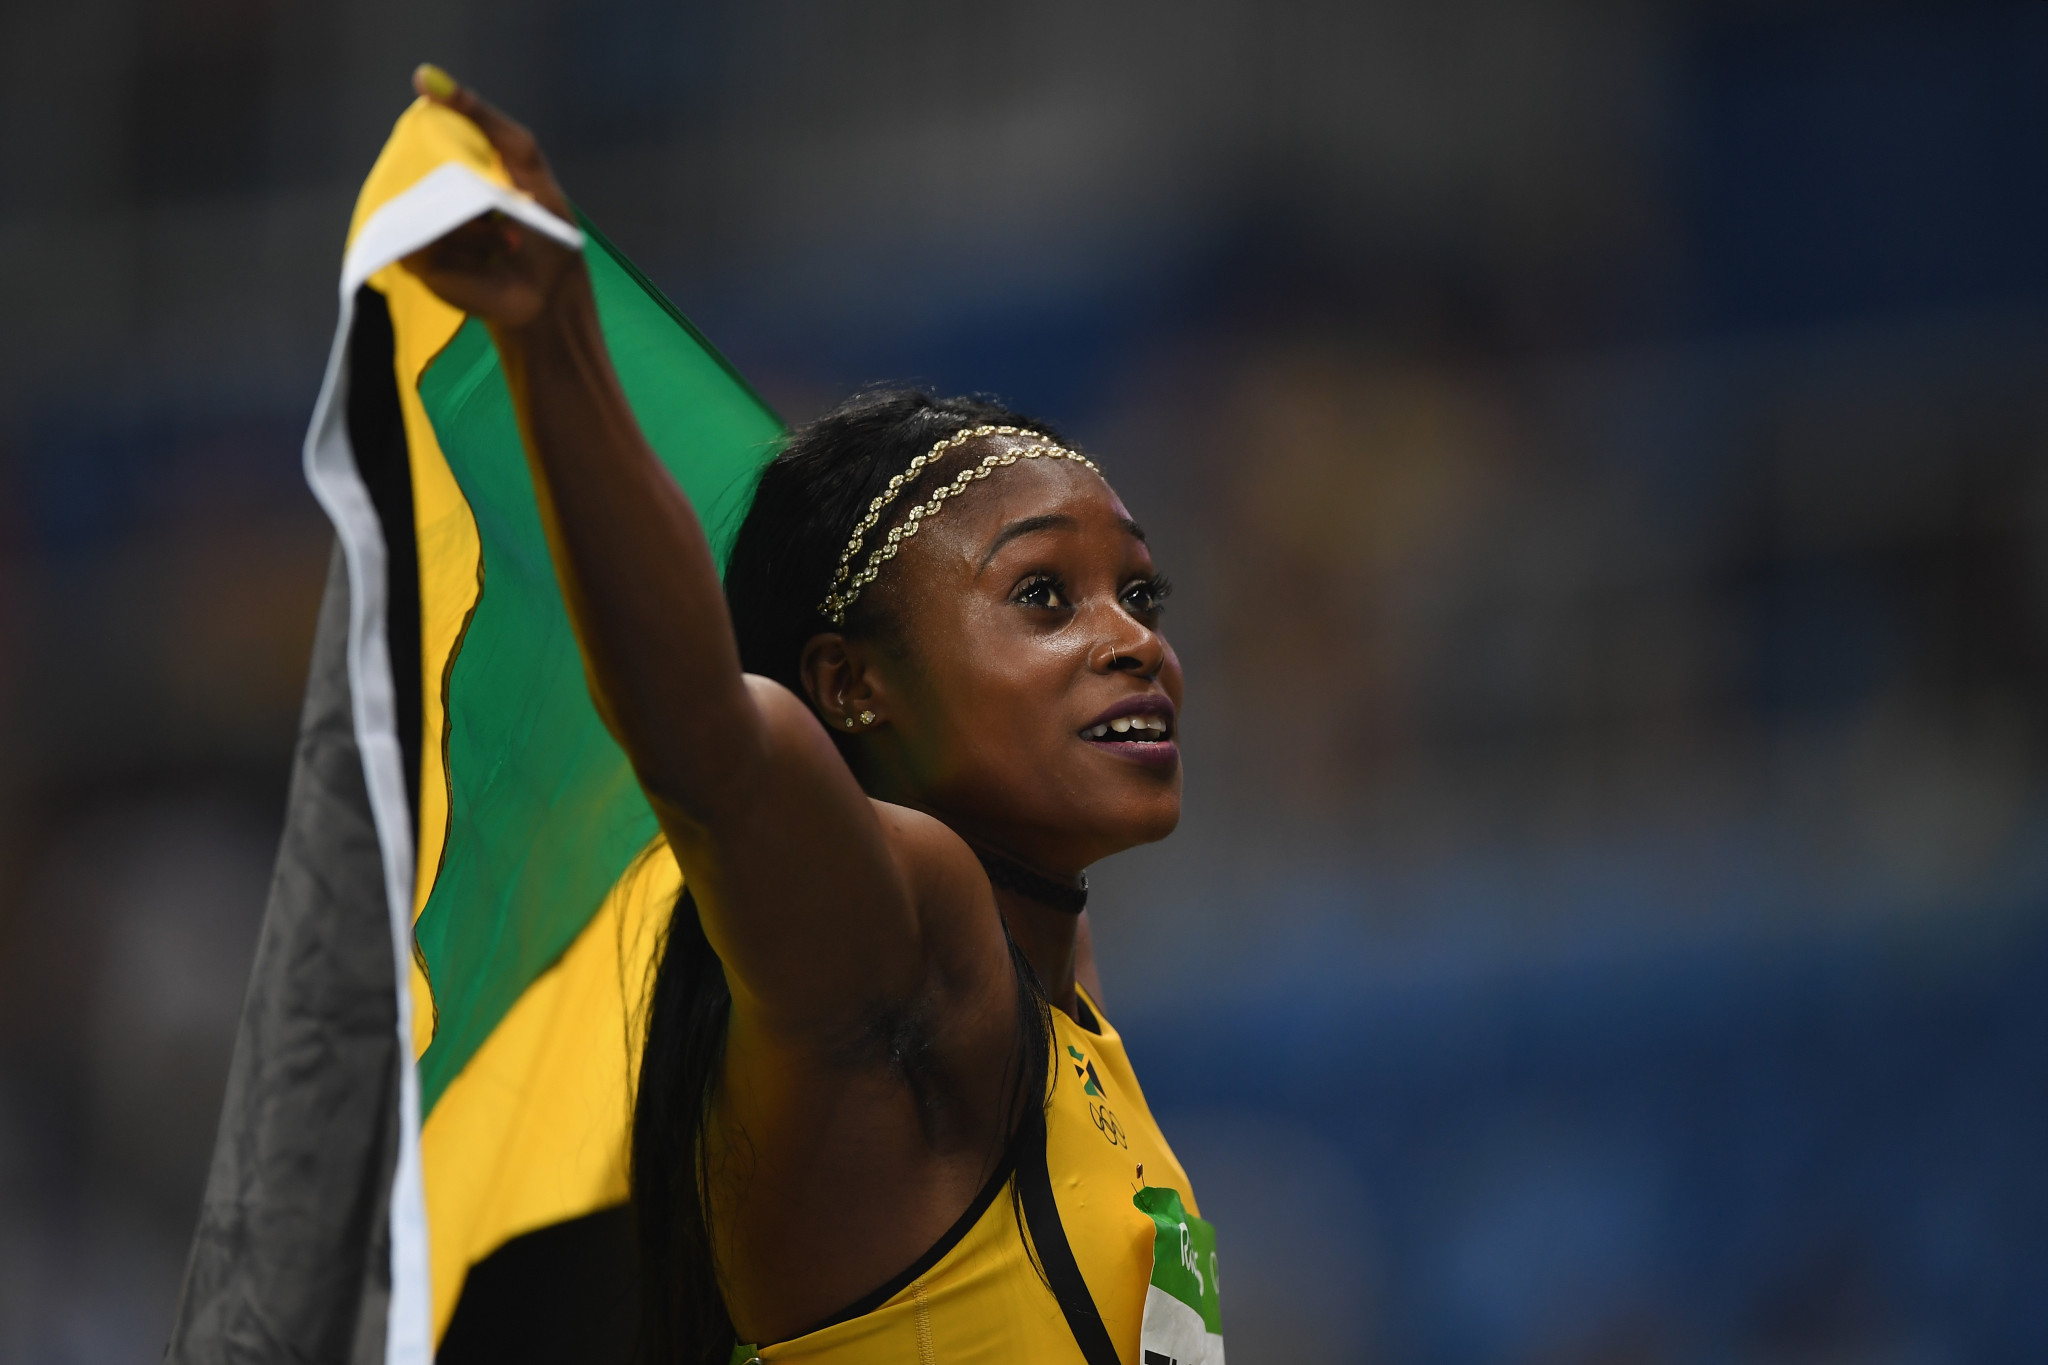 Elaine Thompson is a leading name in the Jamaican athletics squad for Gold Coast 2018 ©Getty Images